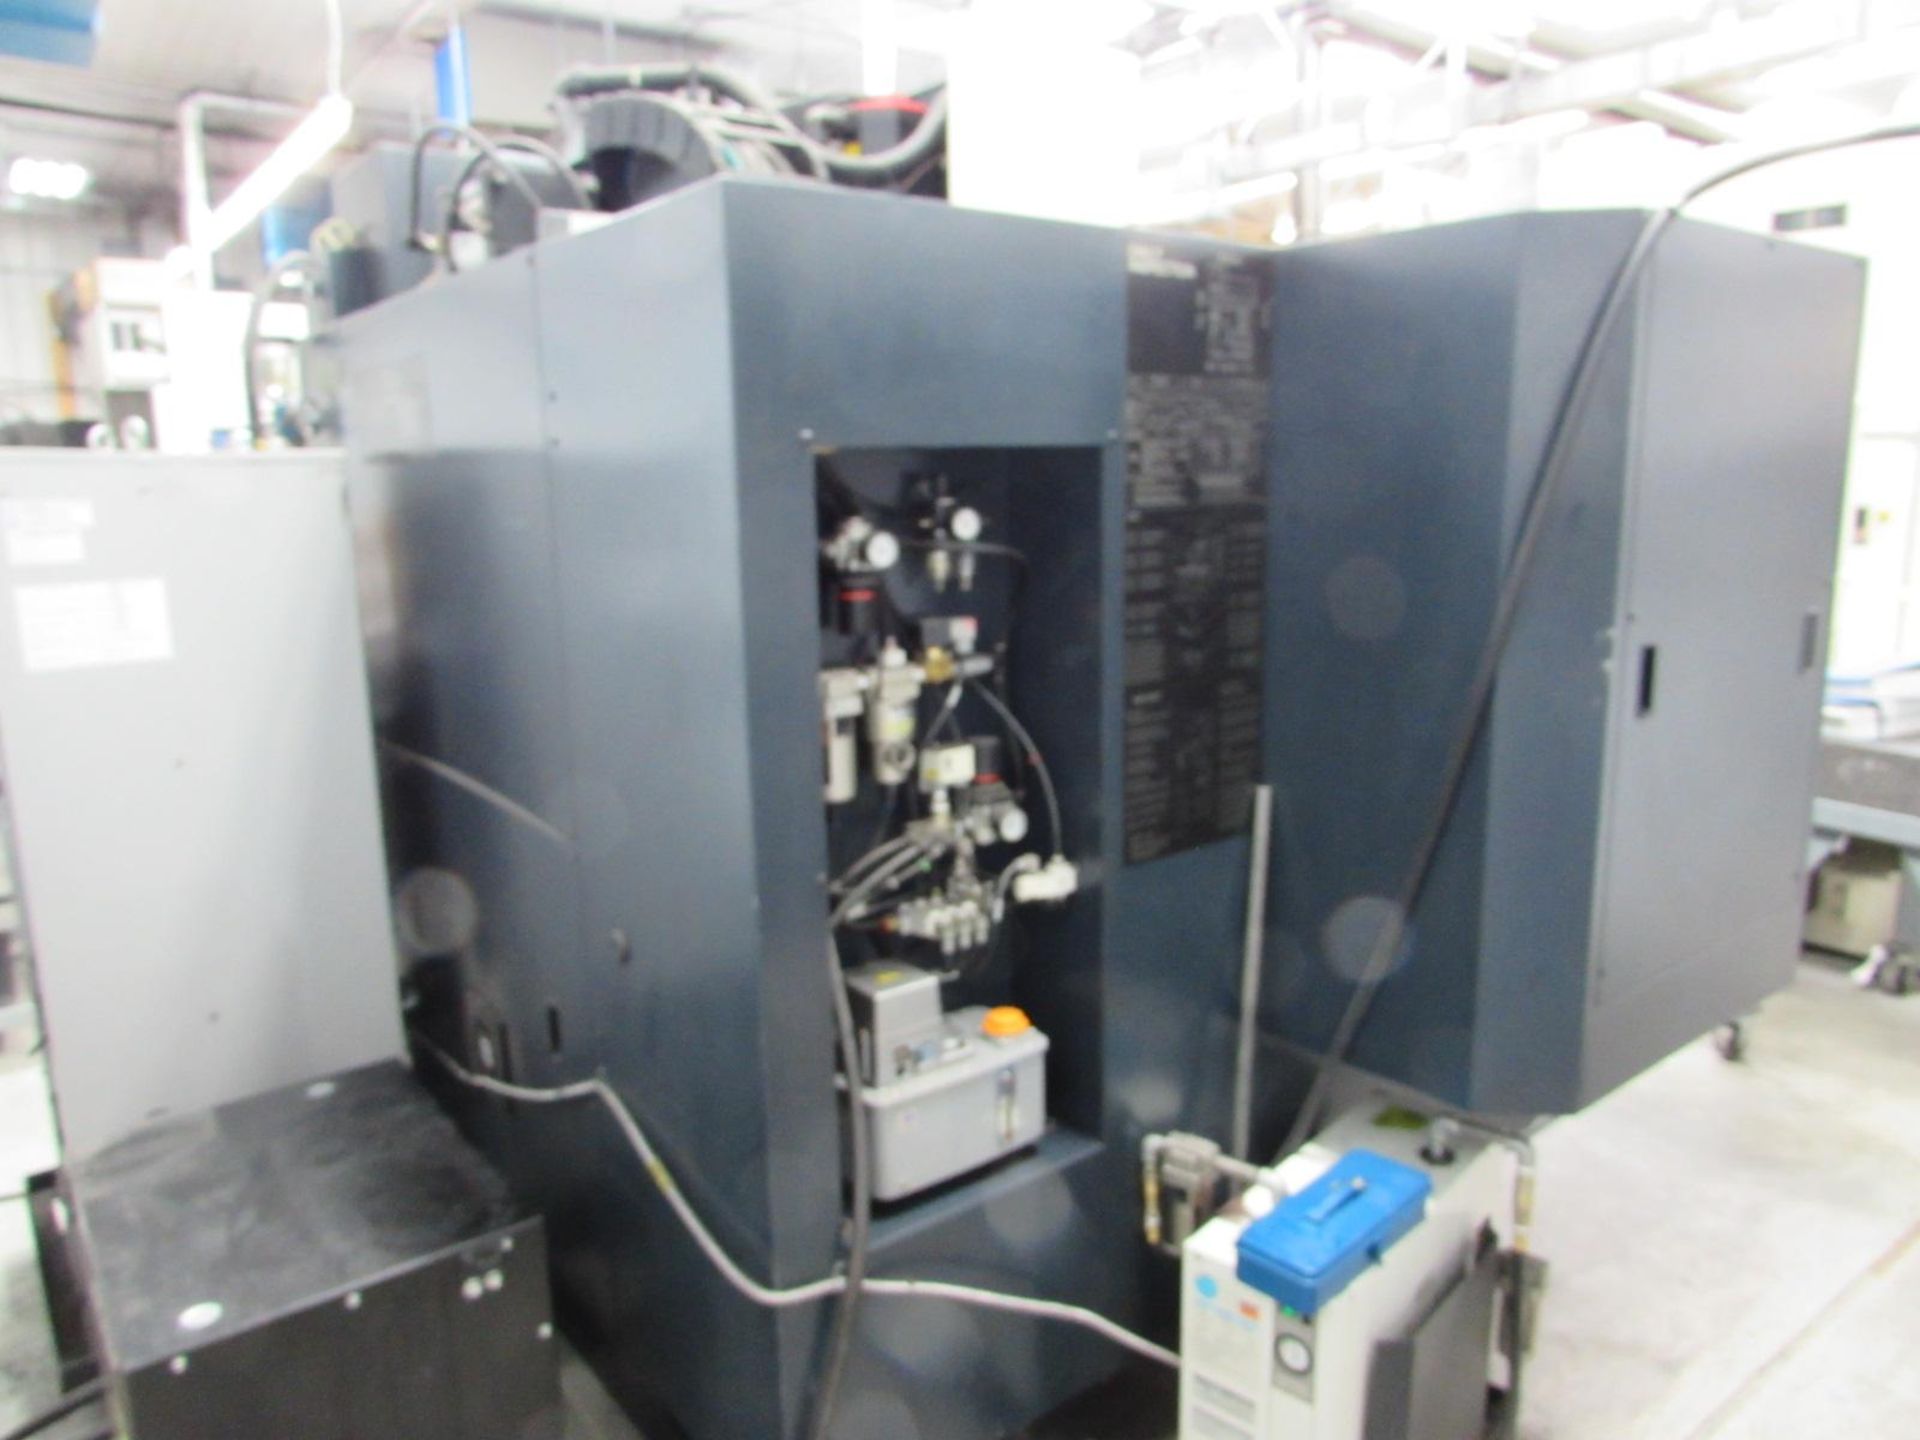 Makino V33 High Speed CNC Vertical Machining Center, 30k RPM Spindle, S/N 1034, New 2003 - Image 7 of 16